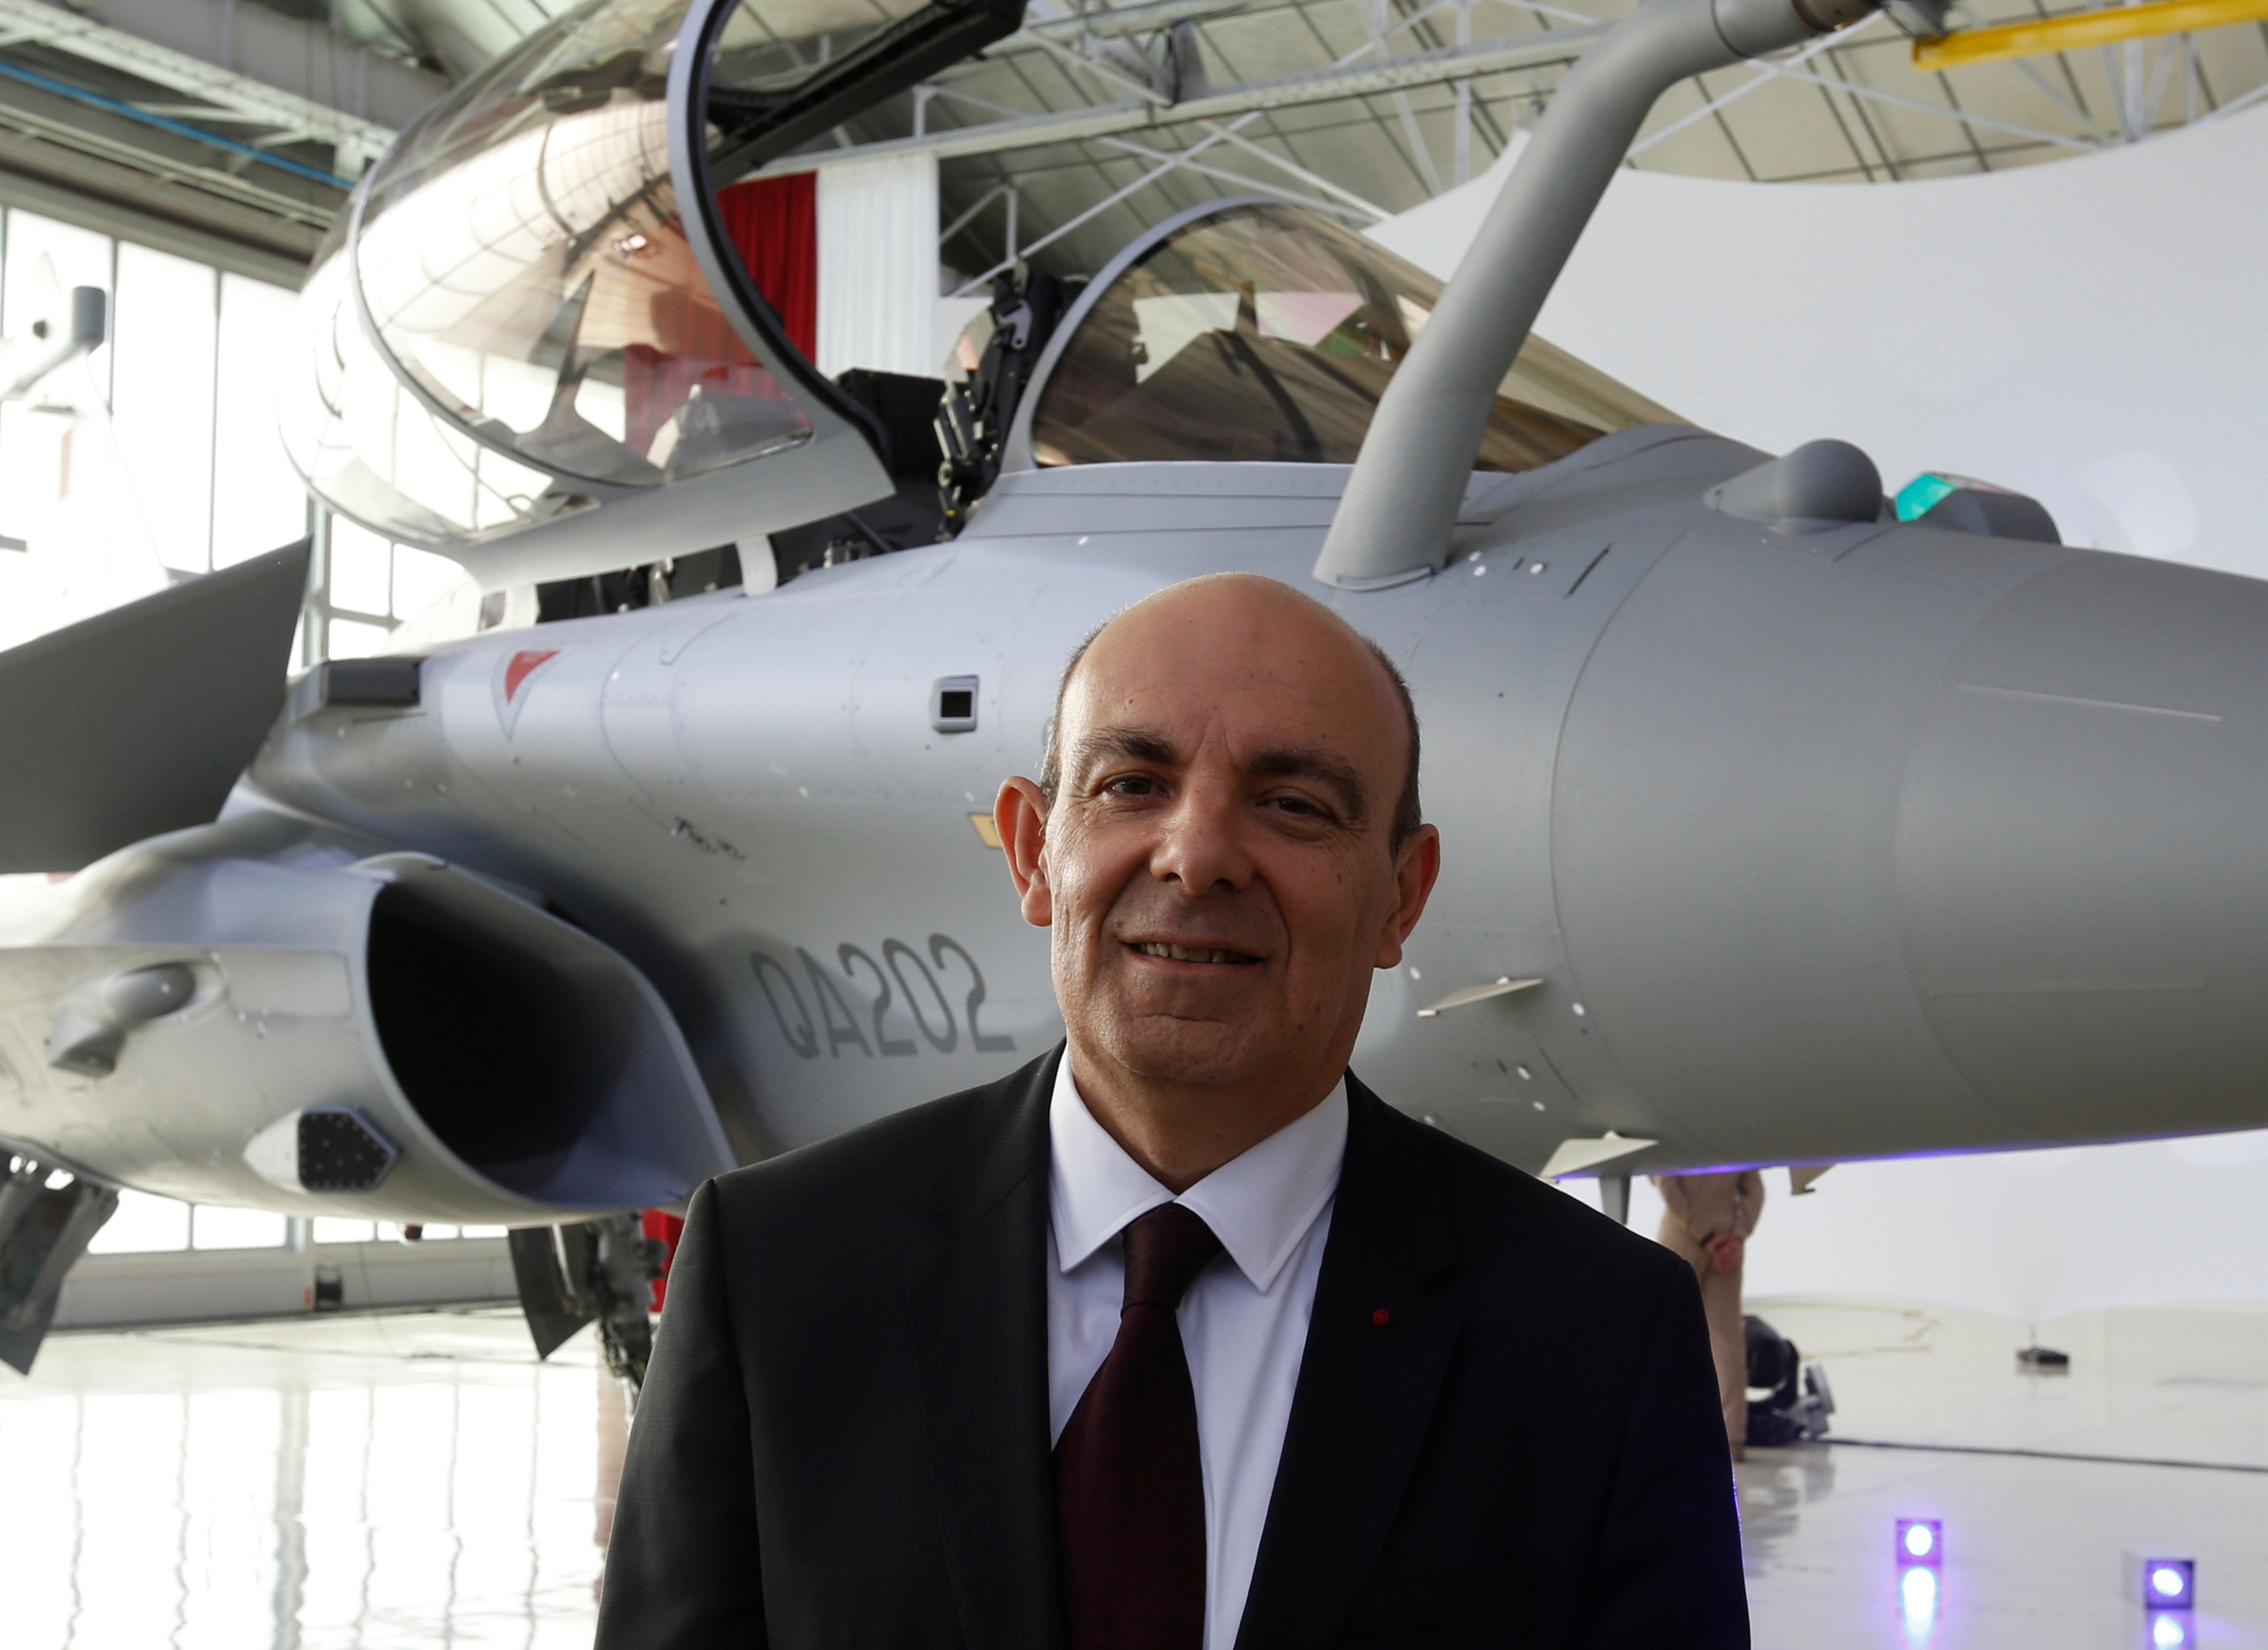 Eric Trappier, Chairman and CEO of Dassault Aviation, poses at the factory of French aircraft manufacturer Dassault Aviation in Merignac near Bordeaux